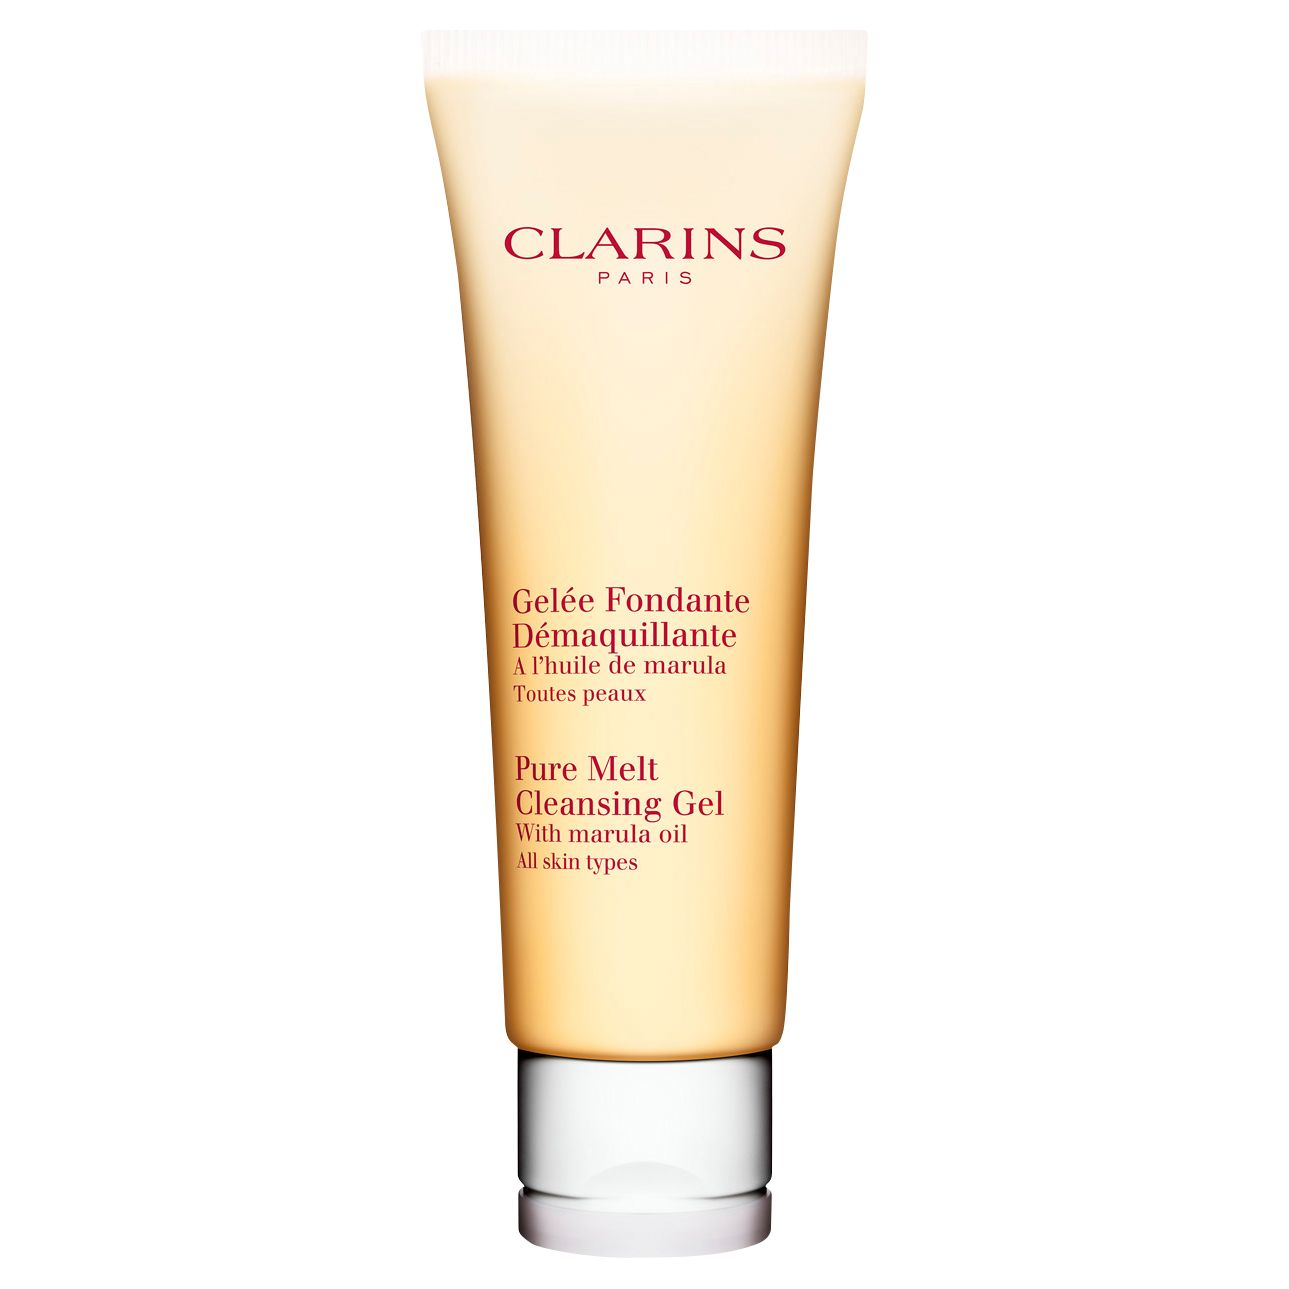 Clarins Pure Melt Cleansing Gel, 125ml